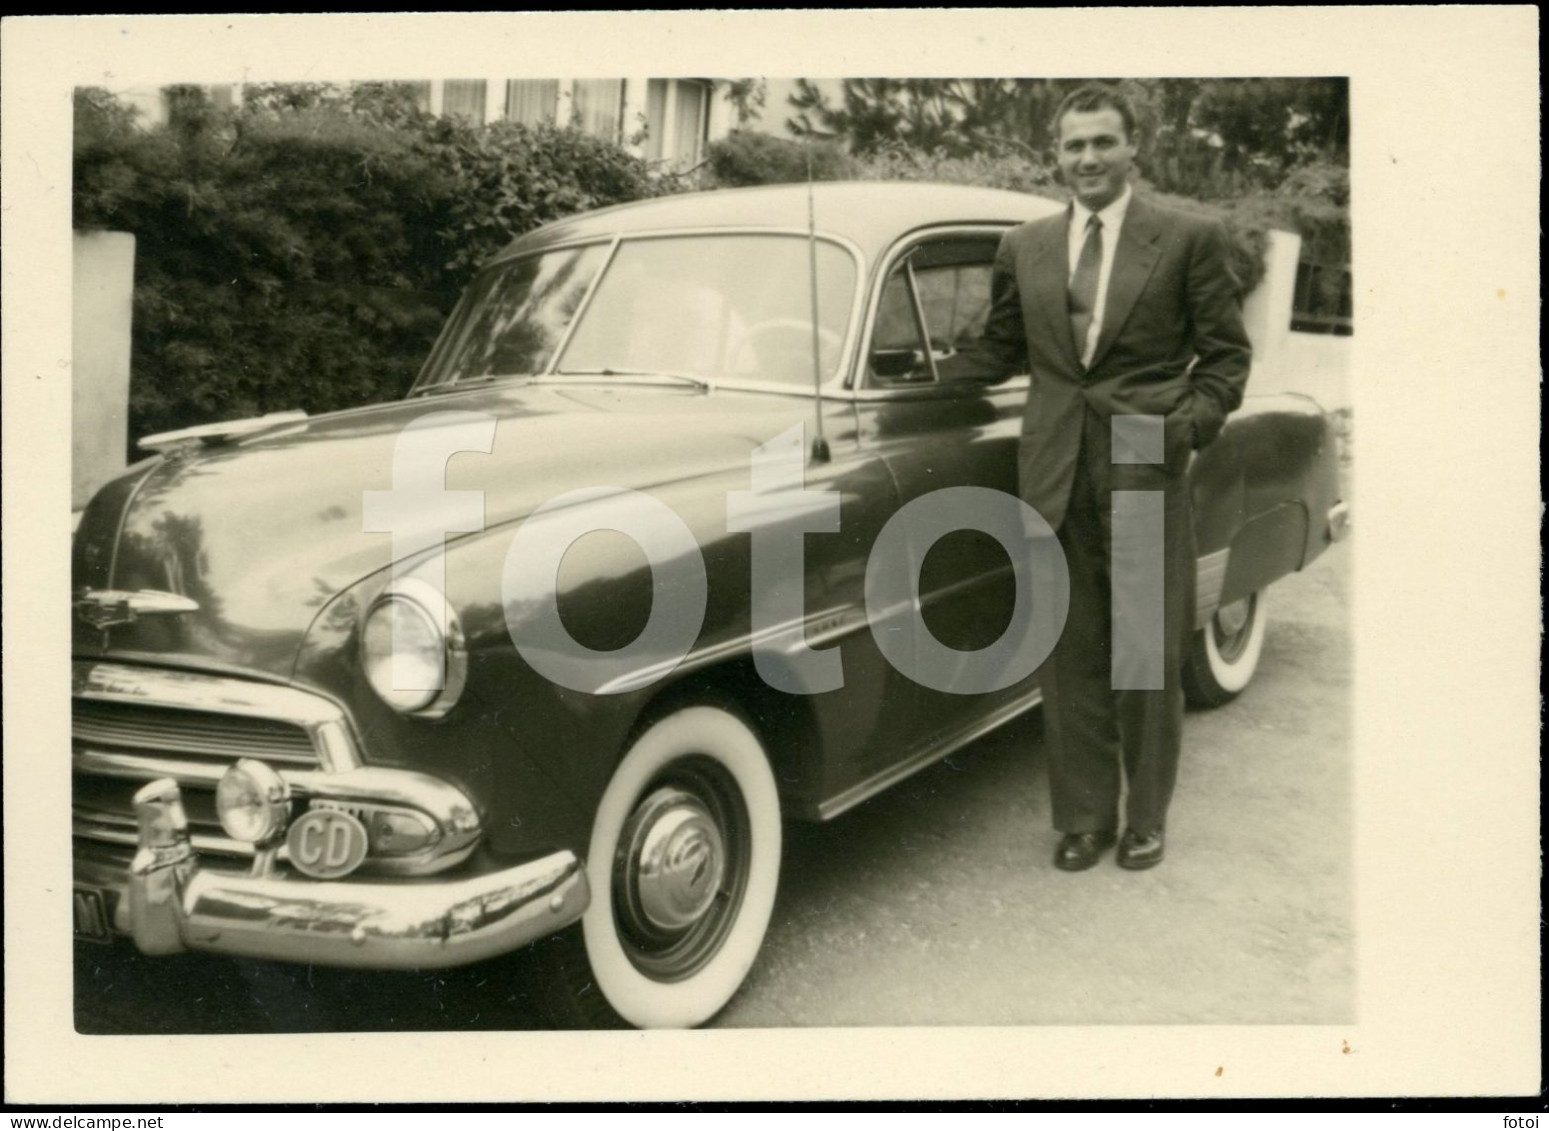 50s REAL PHOTO FOTO CHEVROLET CHEVY CAR DIPLOMATIC CORP AZORES AÇORES PORTUGAL AT8 - Cars